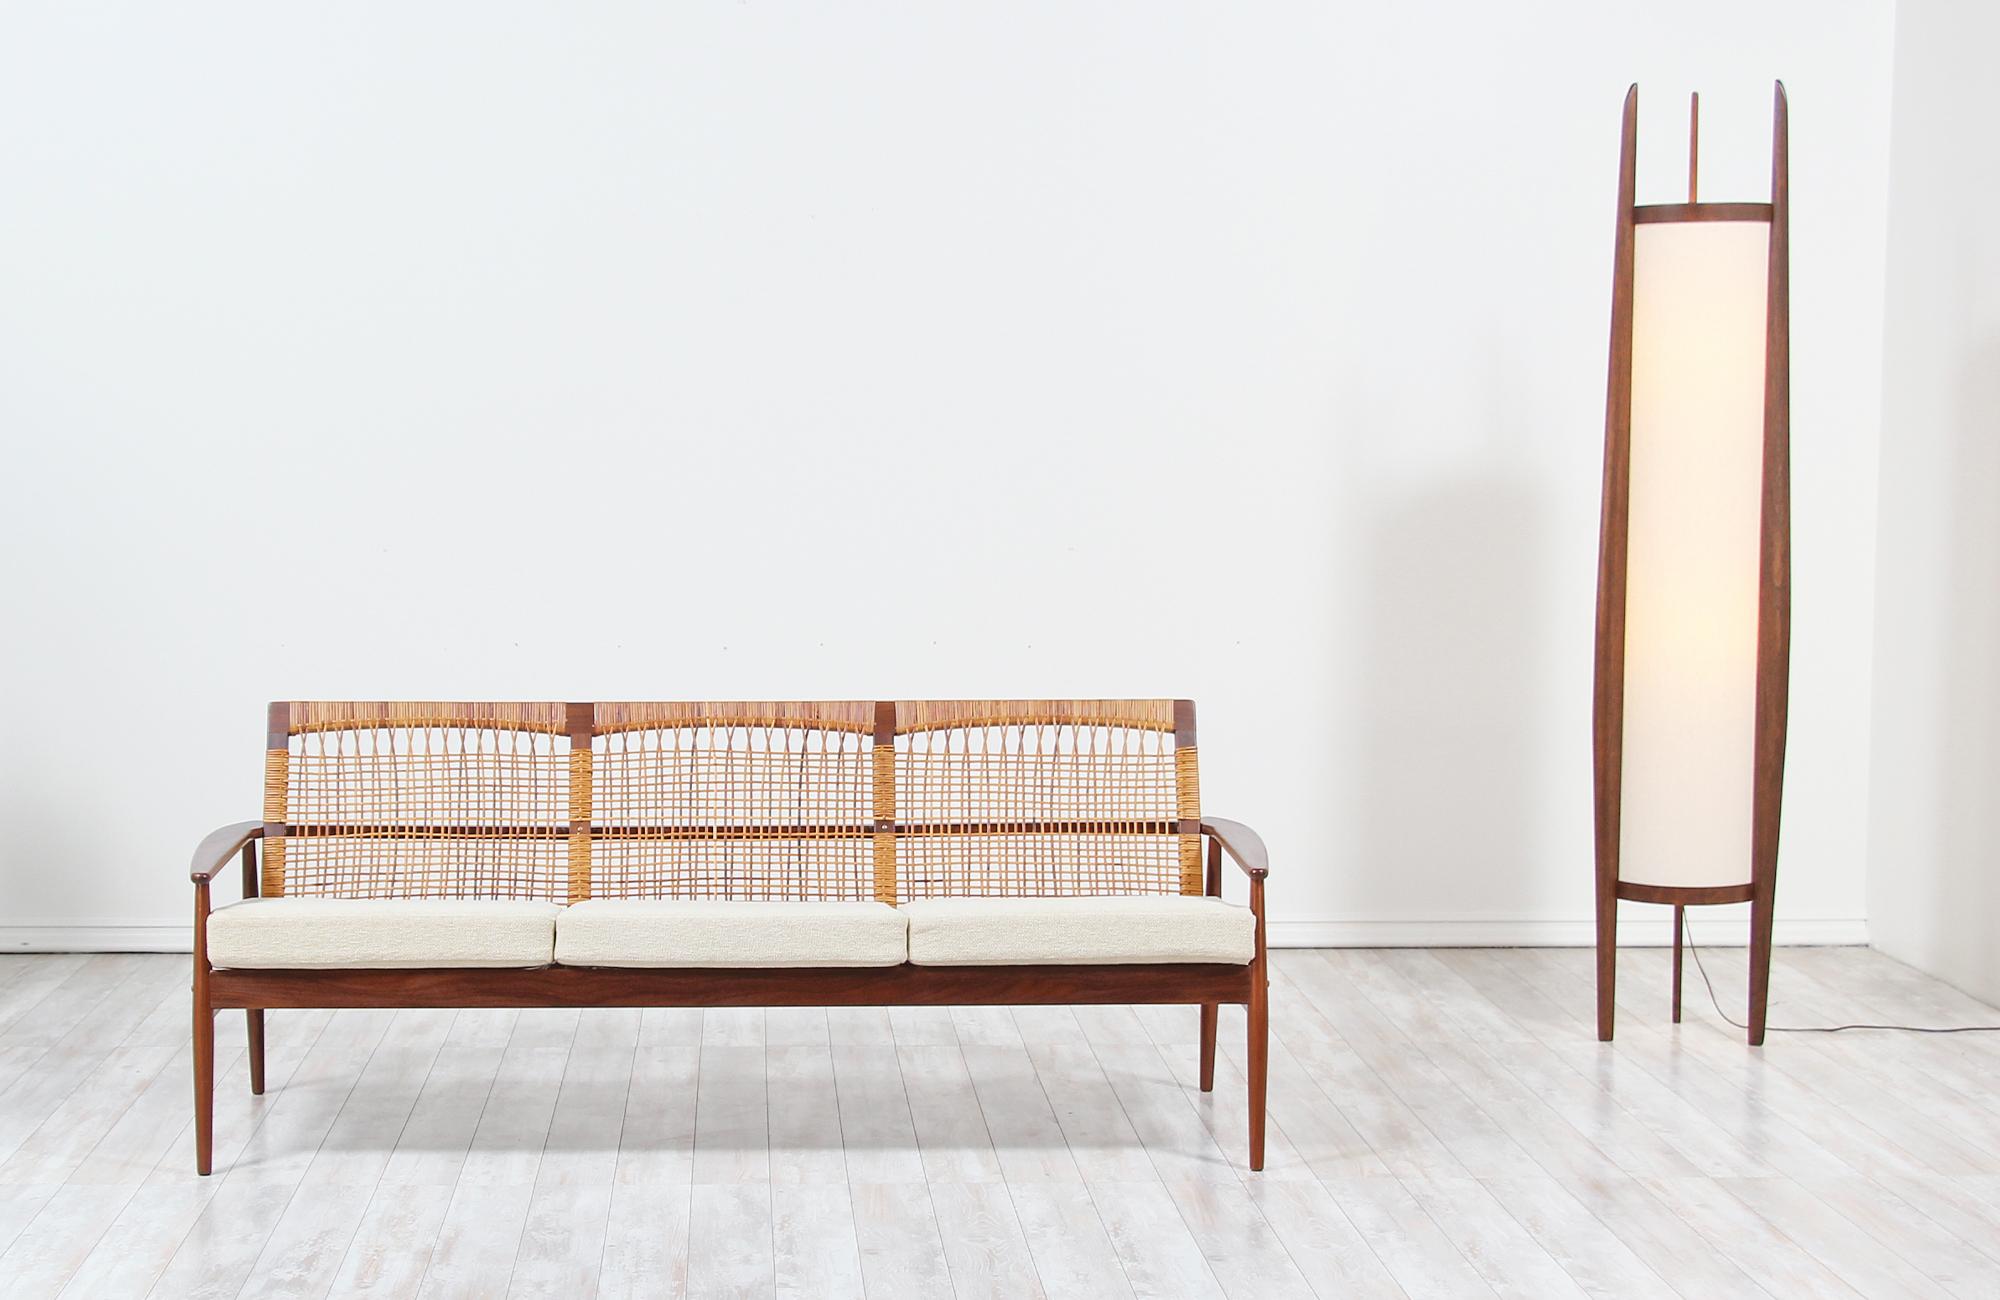 Striking 3-seat sofa designed by Hans Olsen for Juul Kristensen in Denmark, circa 1960s. This stylish design features a sturdy teak wood frame with its original cane backrest and new springs to ensure comfortable support while keeping the modern